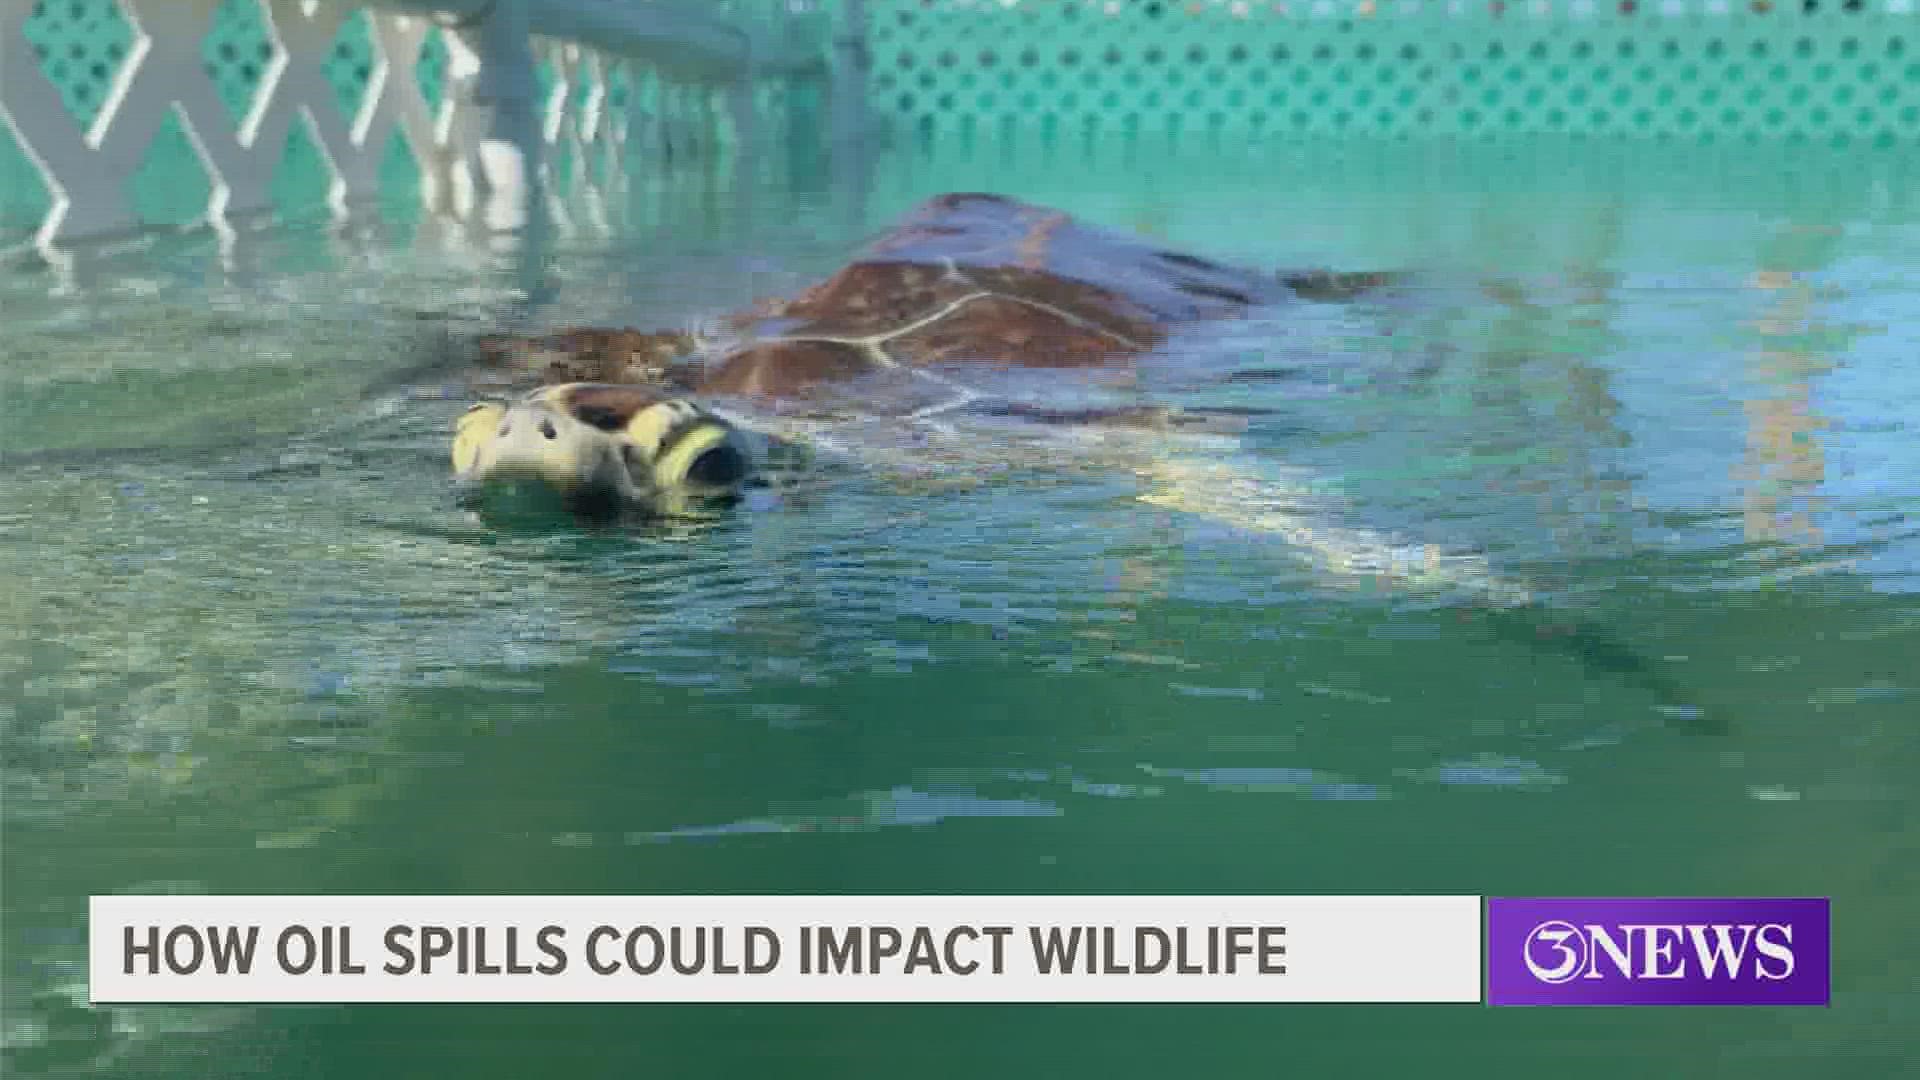 3NEWS spoke with wildlife experts to see how oil spills could impact the environment.